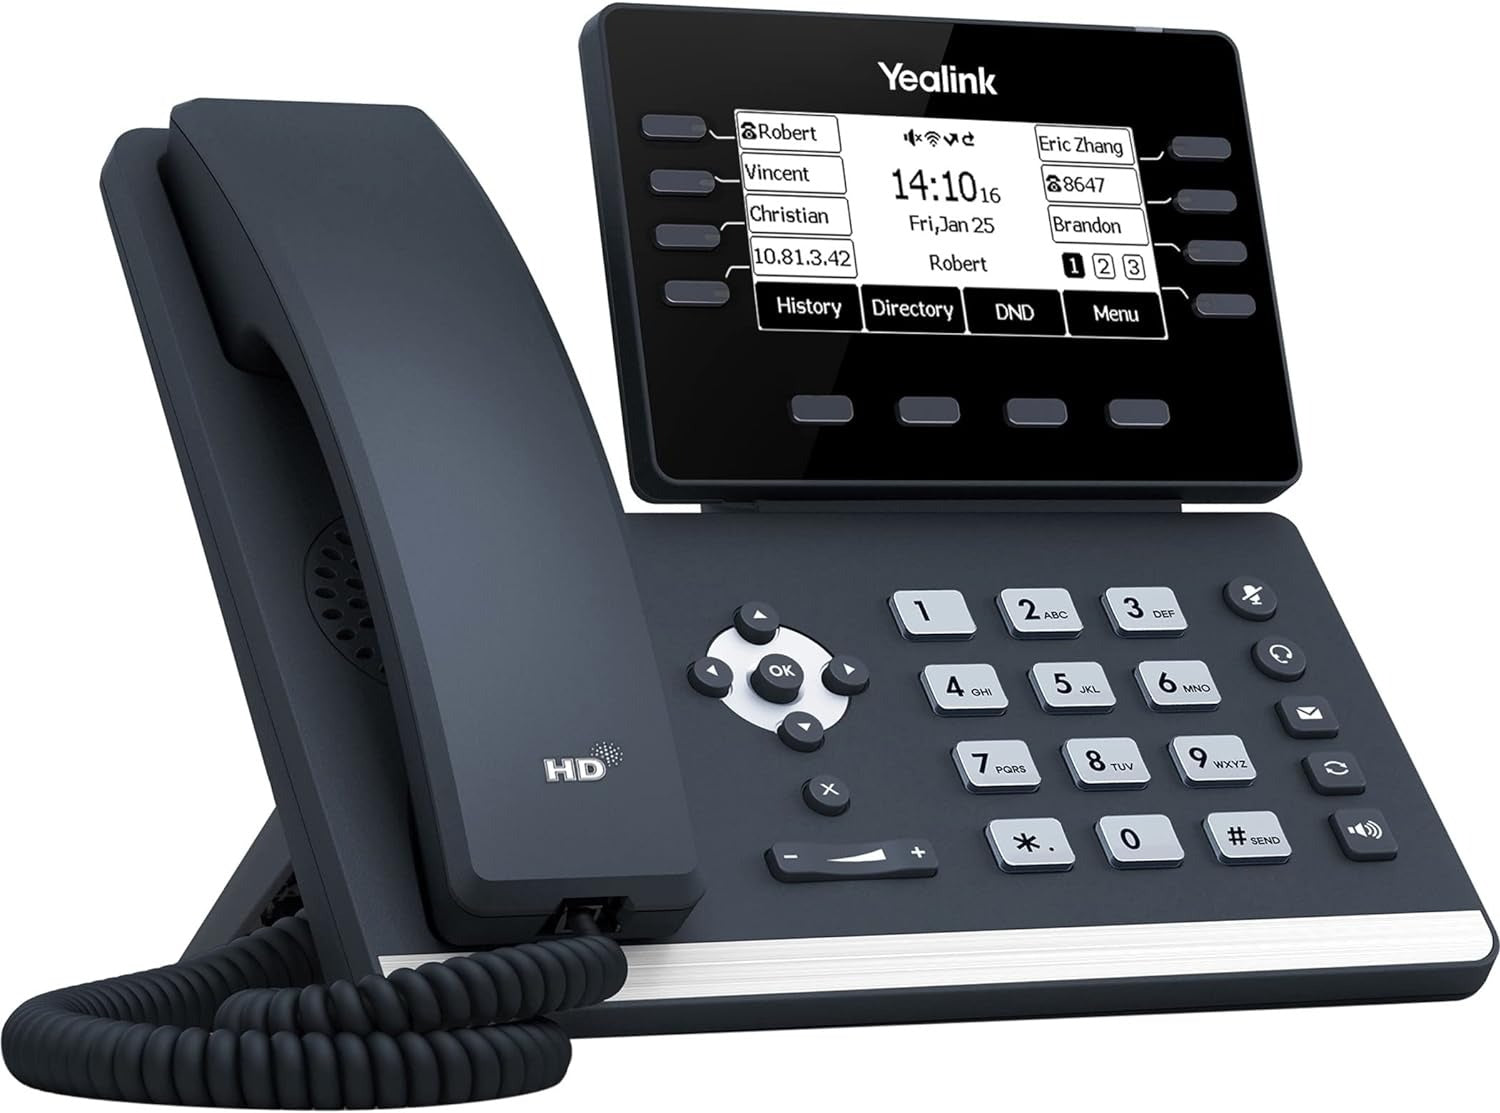 Yealink T53W IP Phone, 12 VoIP Accounts. 3.7-Inch Display w/o Adapter - Black (Pre-Owned)